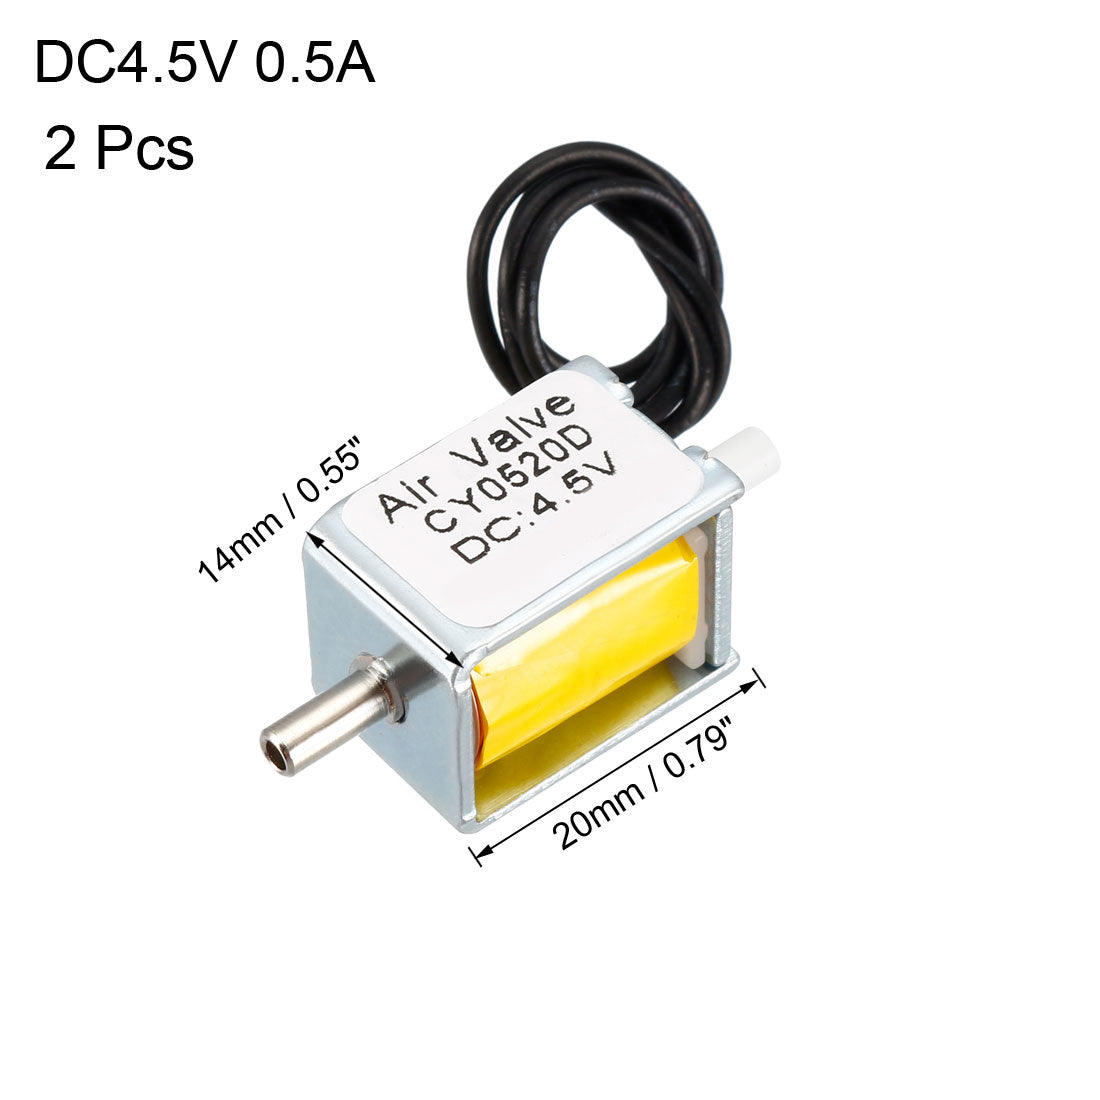 uxcell Uxcell Miniature Solenoid Valve 2 Way Normally Closed DC4.5V 0.5A Air Solenoid Valve, 2pcs